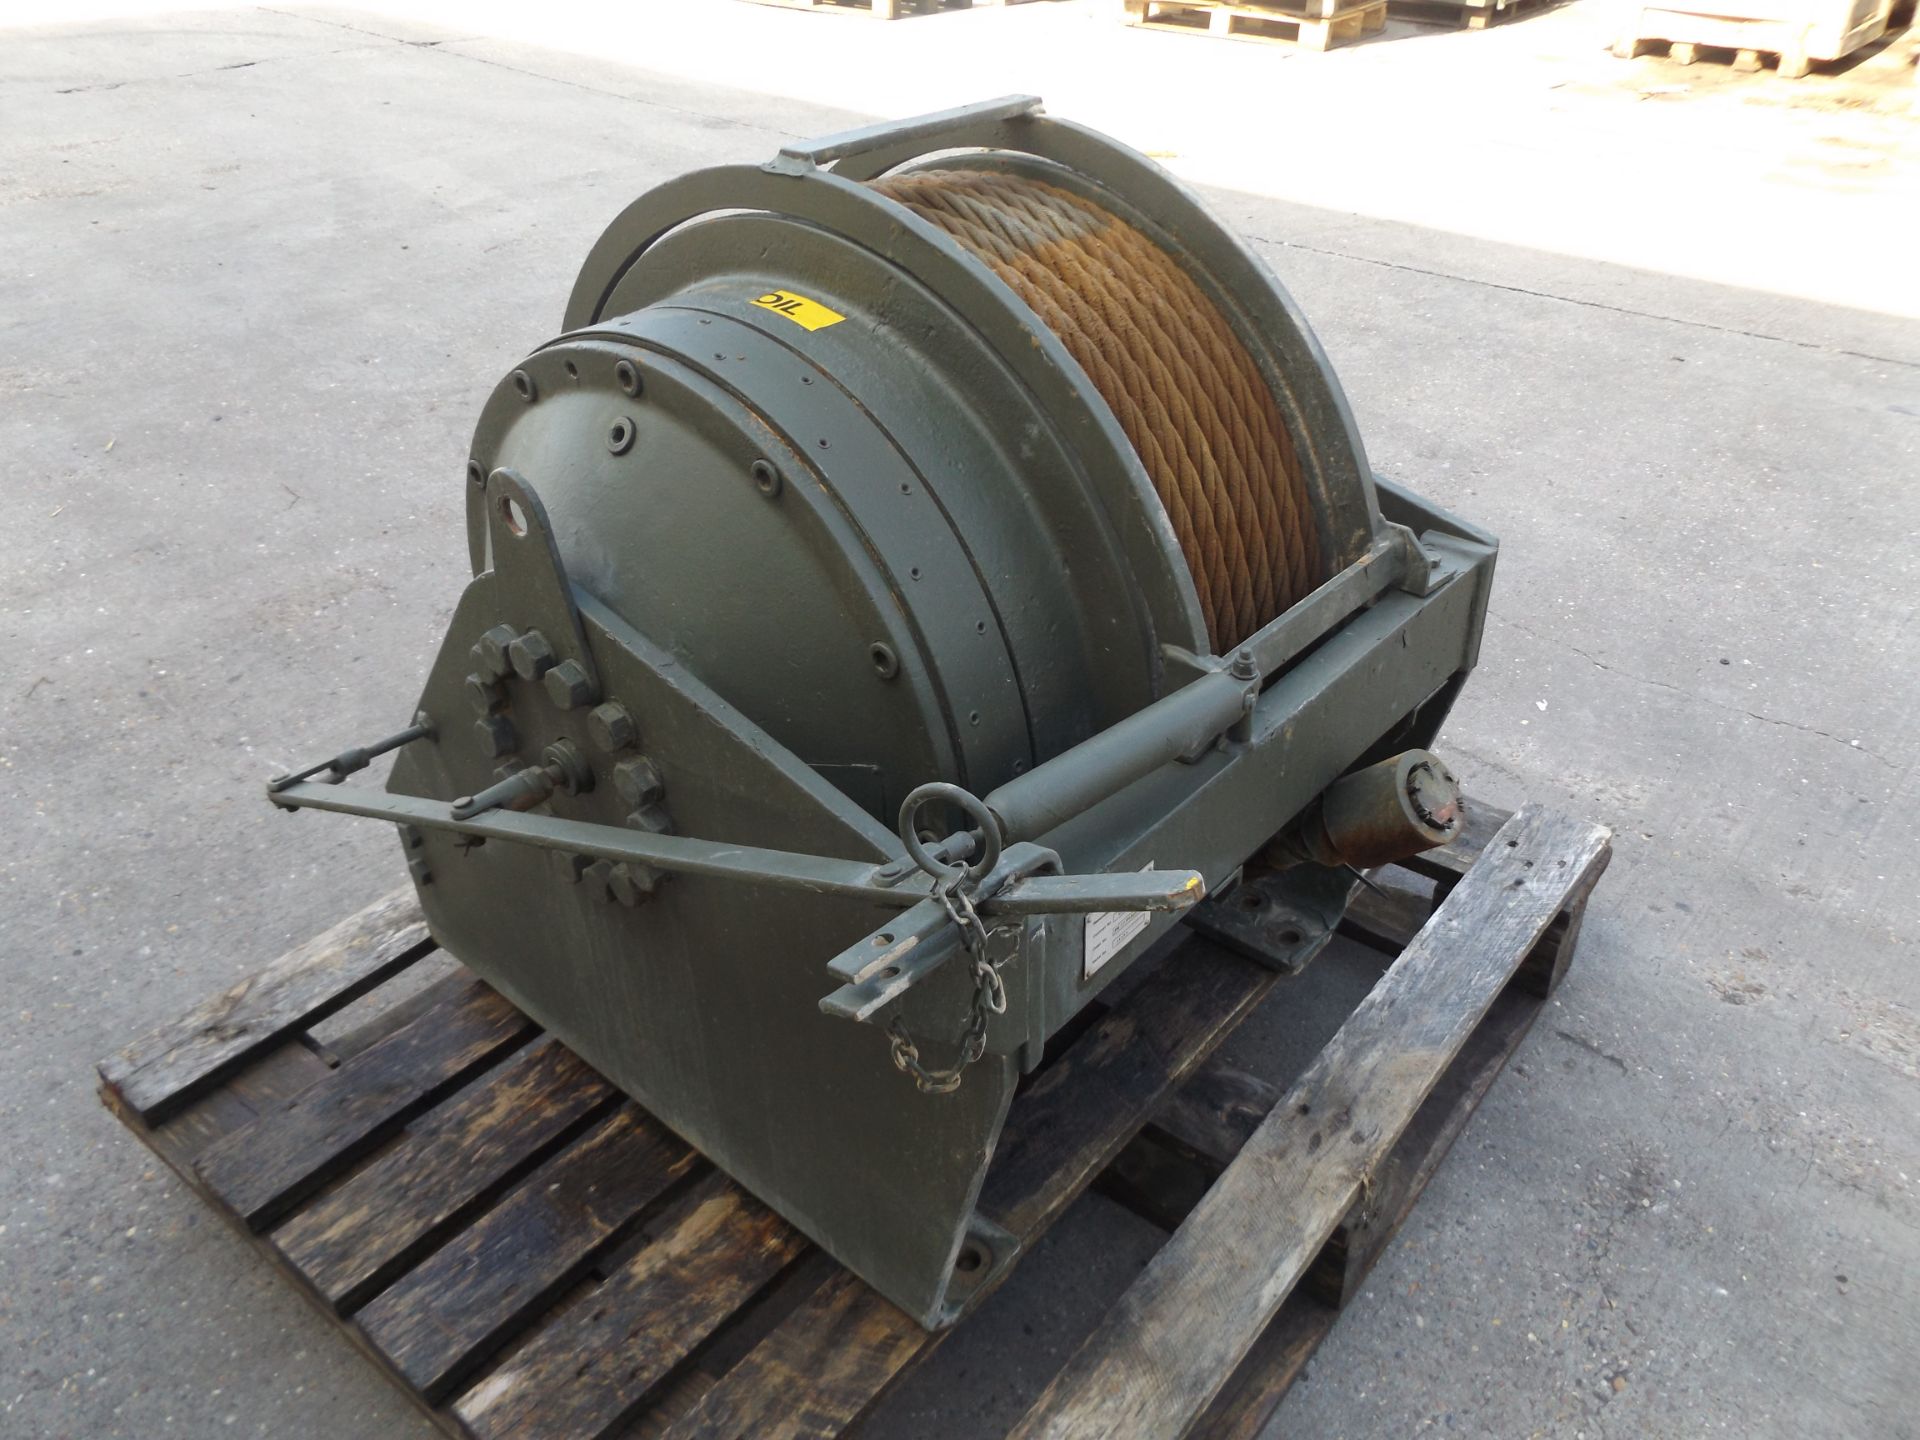 Rotzler 25 Ton Foden 6x6 Recovery Vehicle Mounted Hydraulic Winch - Image 3 of 8